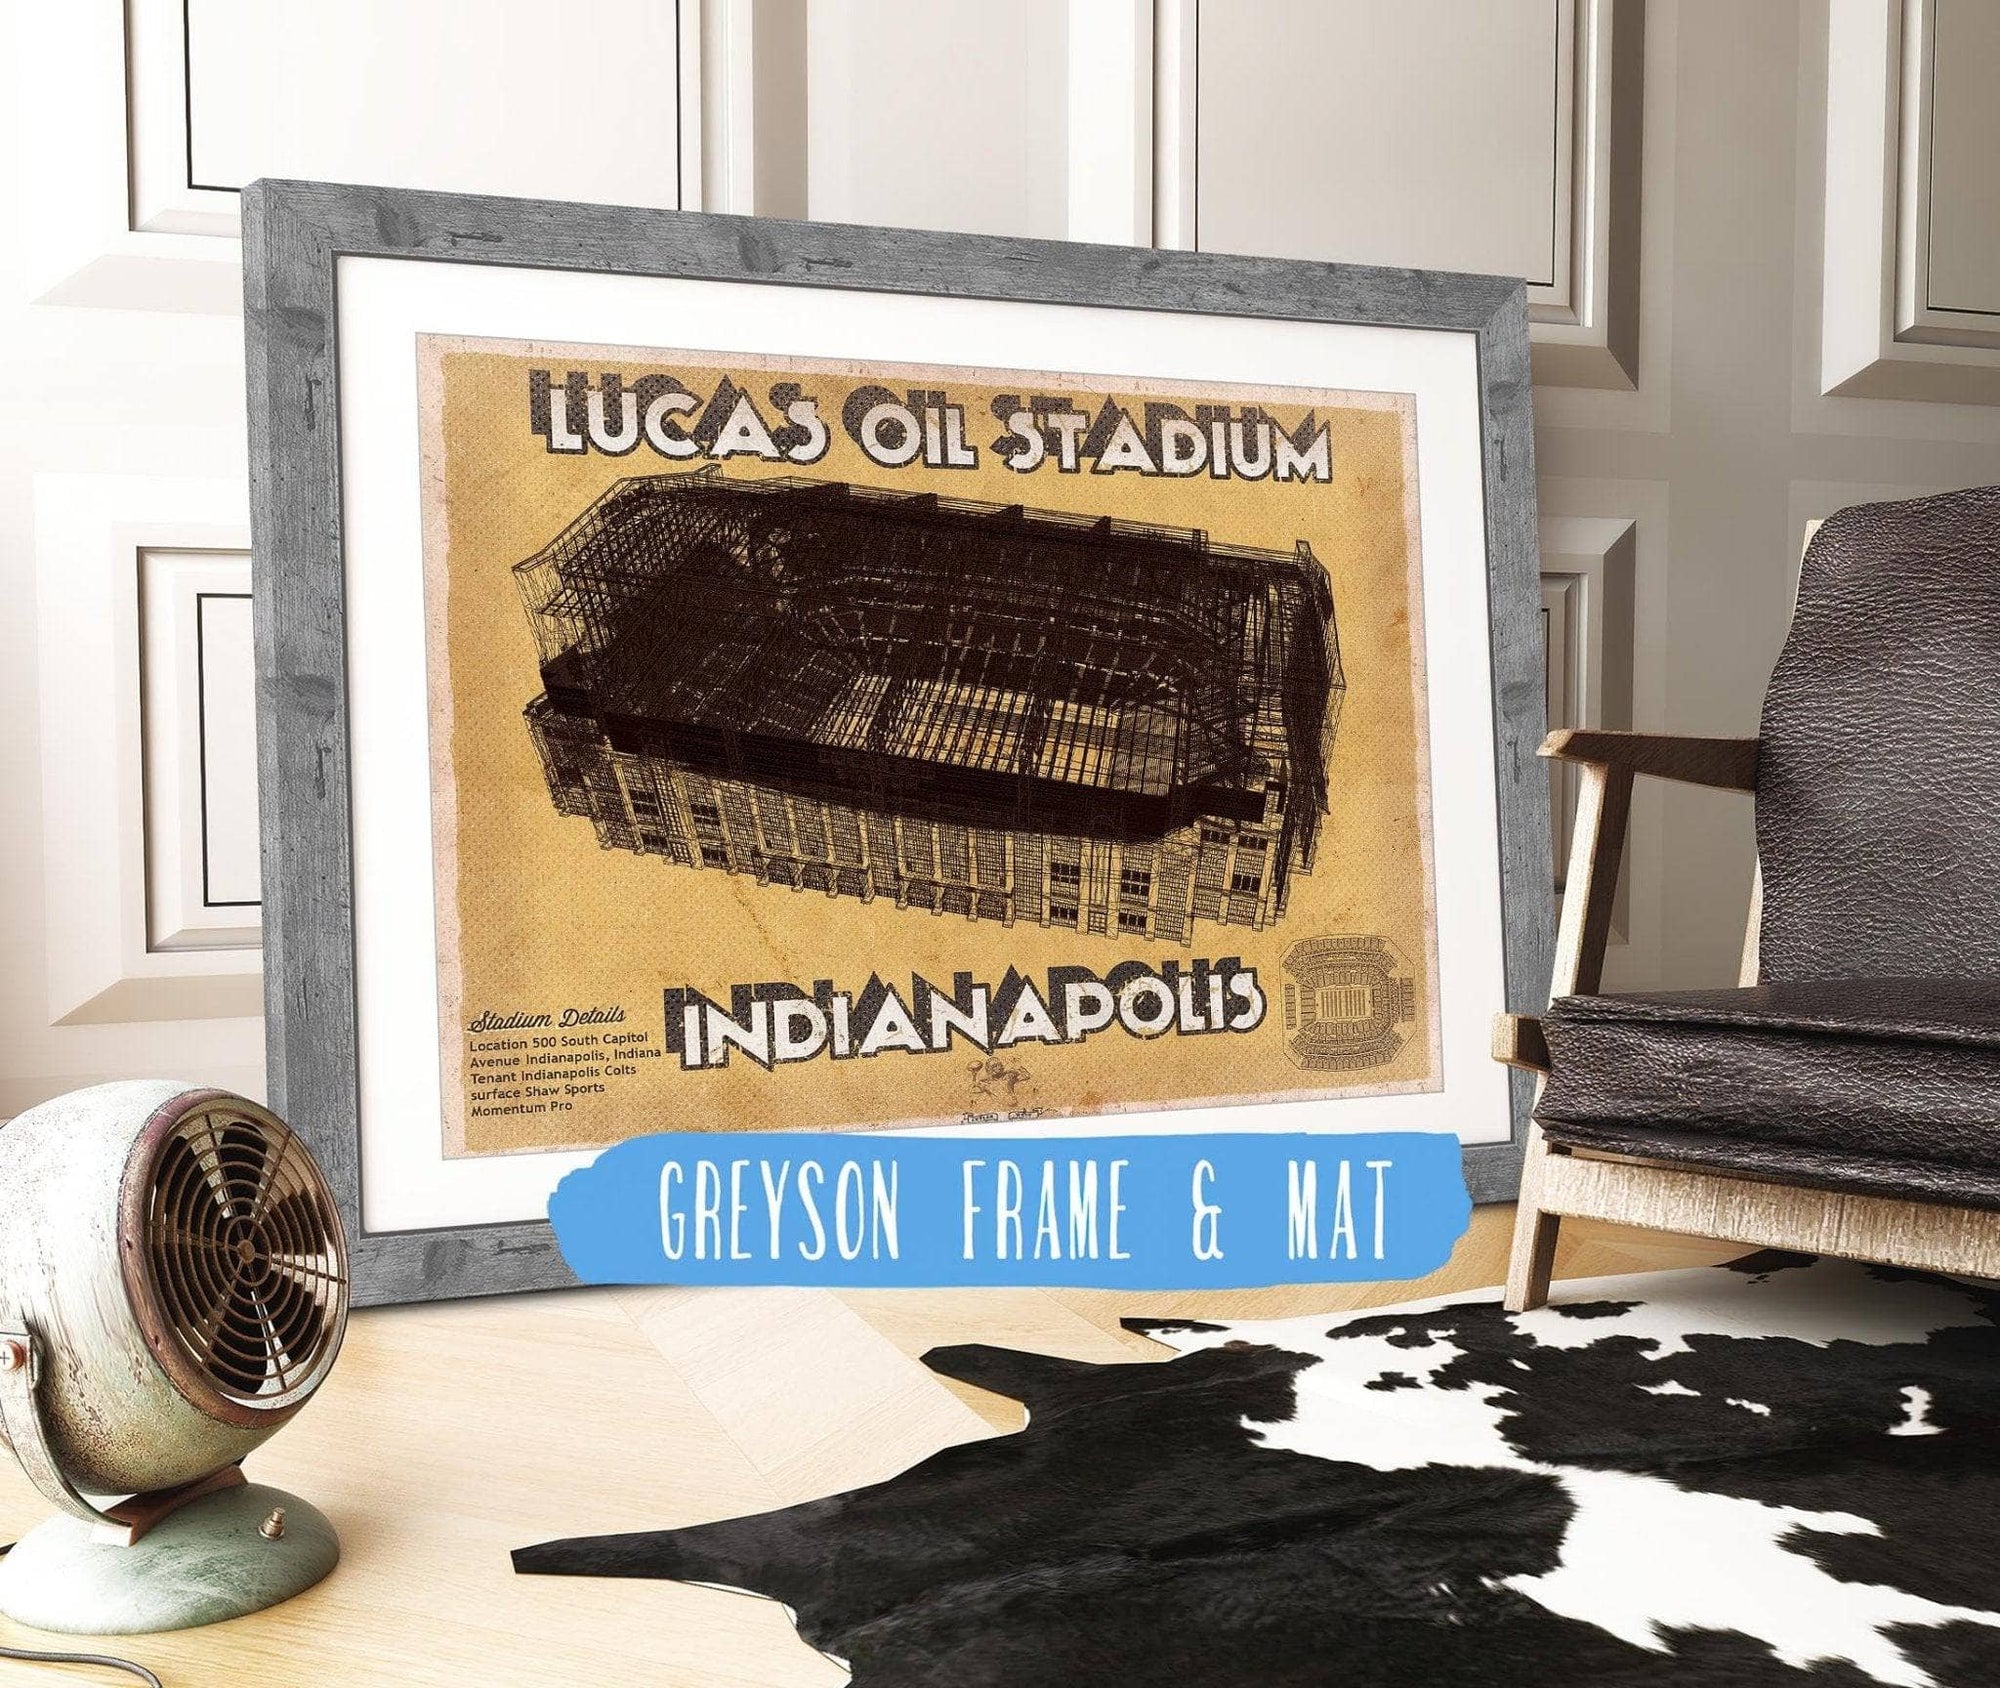 Cutler West Pro Football Collection 14" x 11" / Greyson Frame & Mat Indianapolis Colts Lucas Oil Stadium Vintage Football Print 700666450_64980